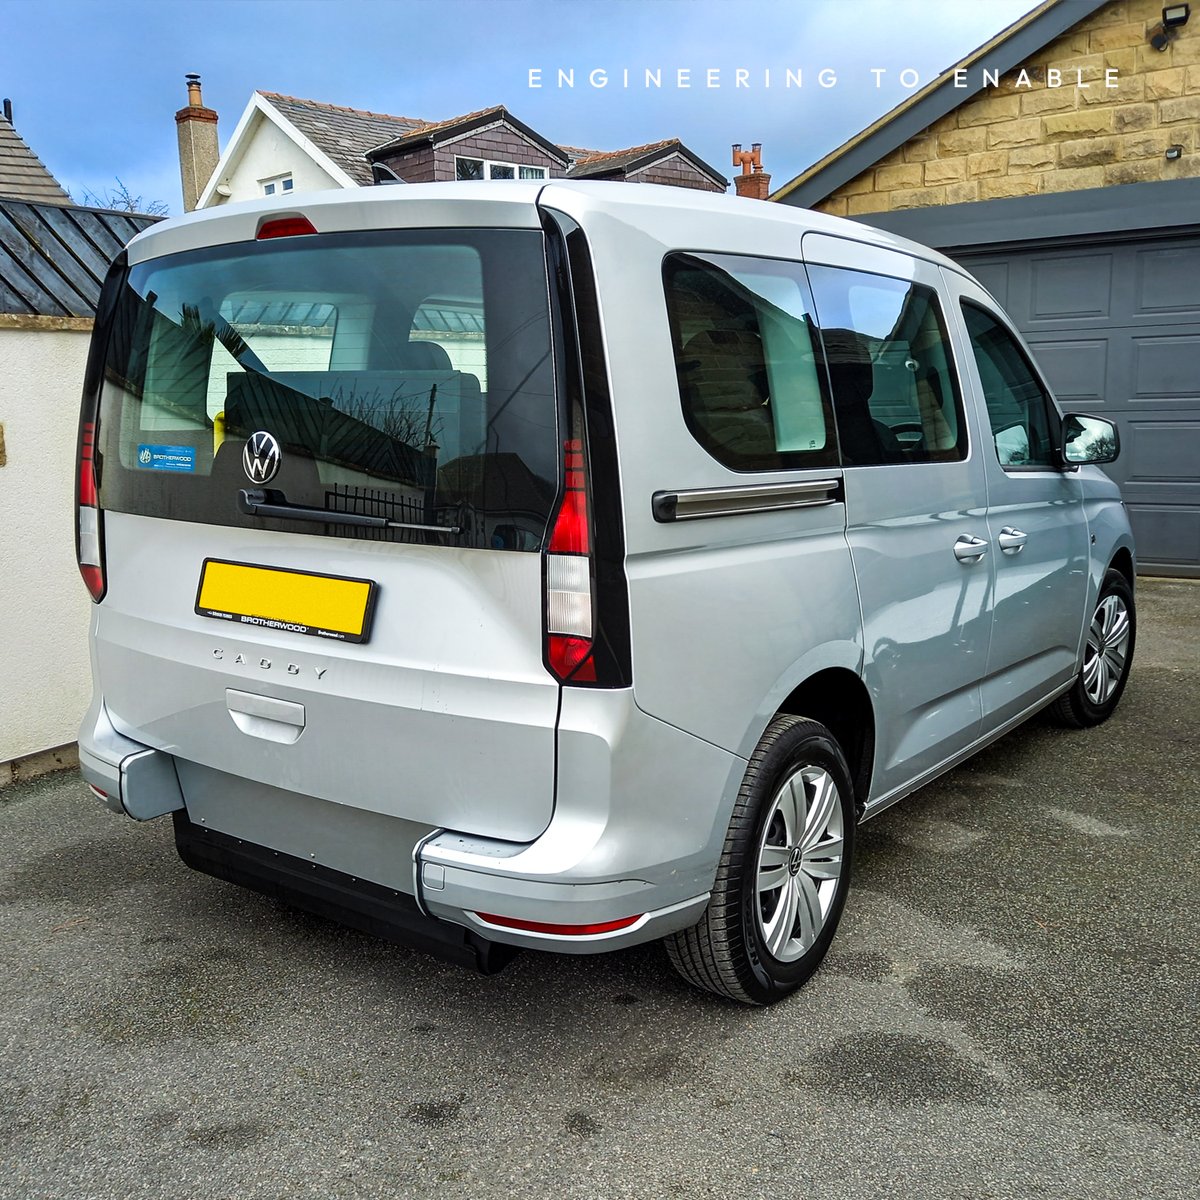 This Reflex Silver Volkswagen Caddy was delivered to a client in Leeds this week! This unique Caddy Wheelchair Accessible Vehicle conversion is inclusive by design, with the wheelchair positioned between the rear passenger seats.